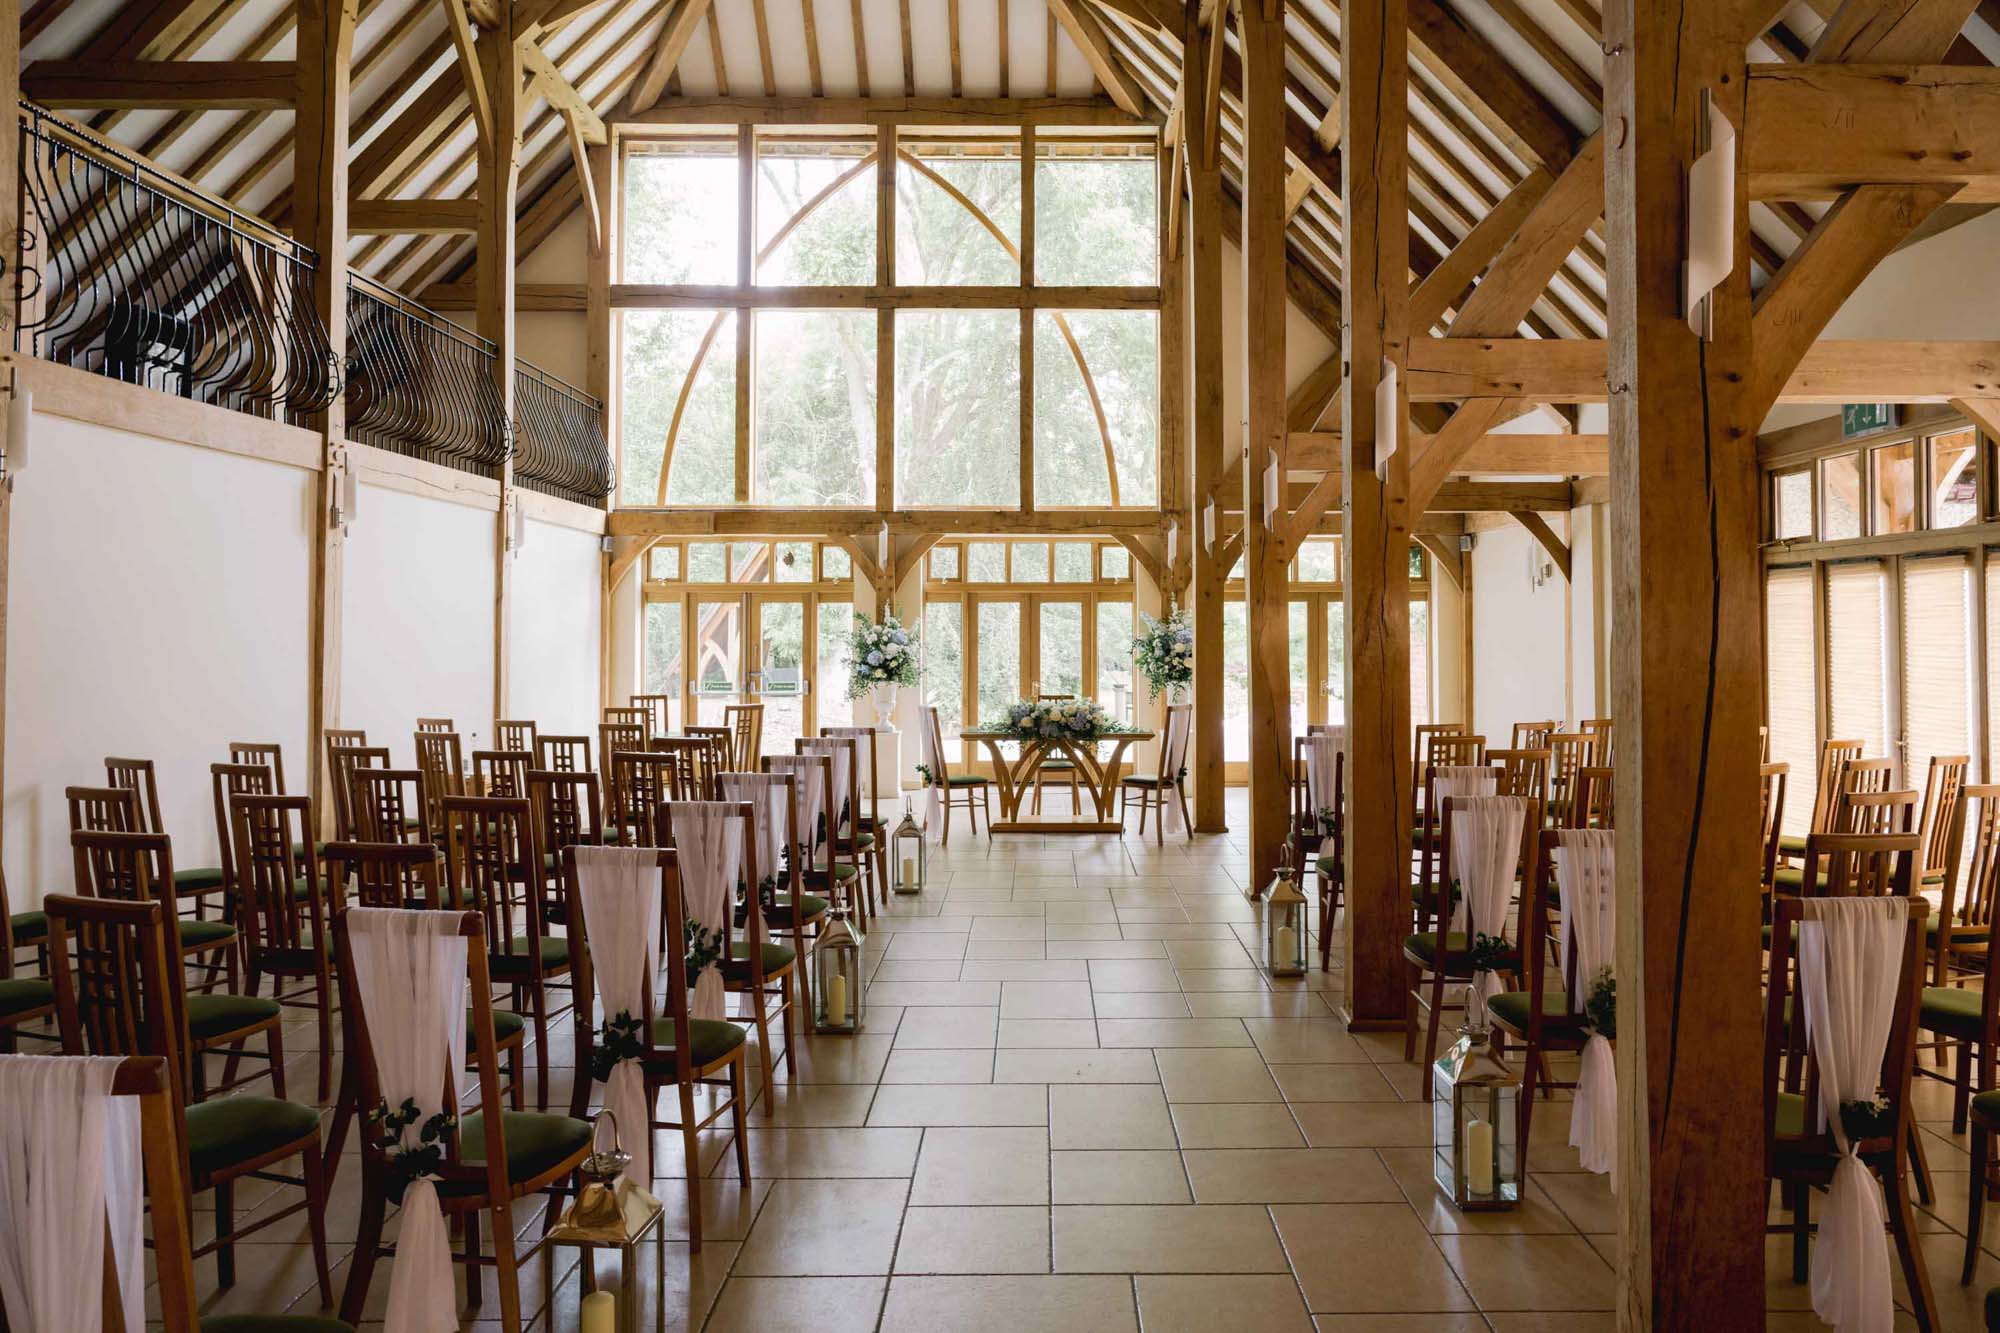 The wedding ceremony setup indoors at Rivervale Barn in Hampshire.